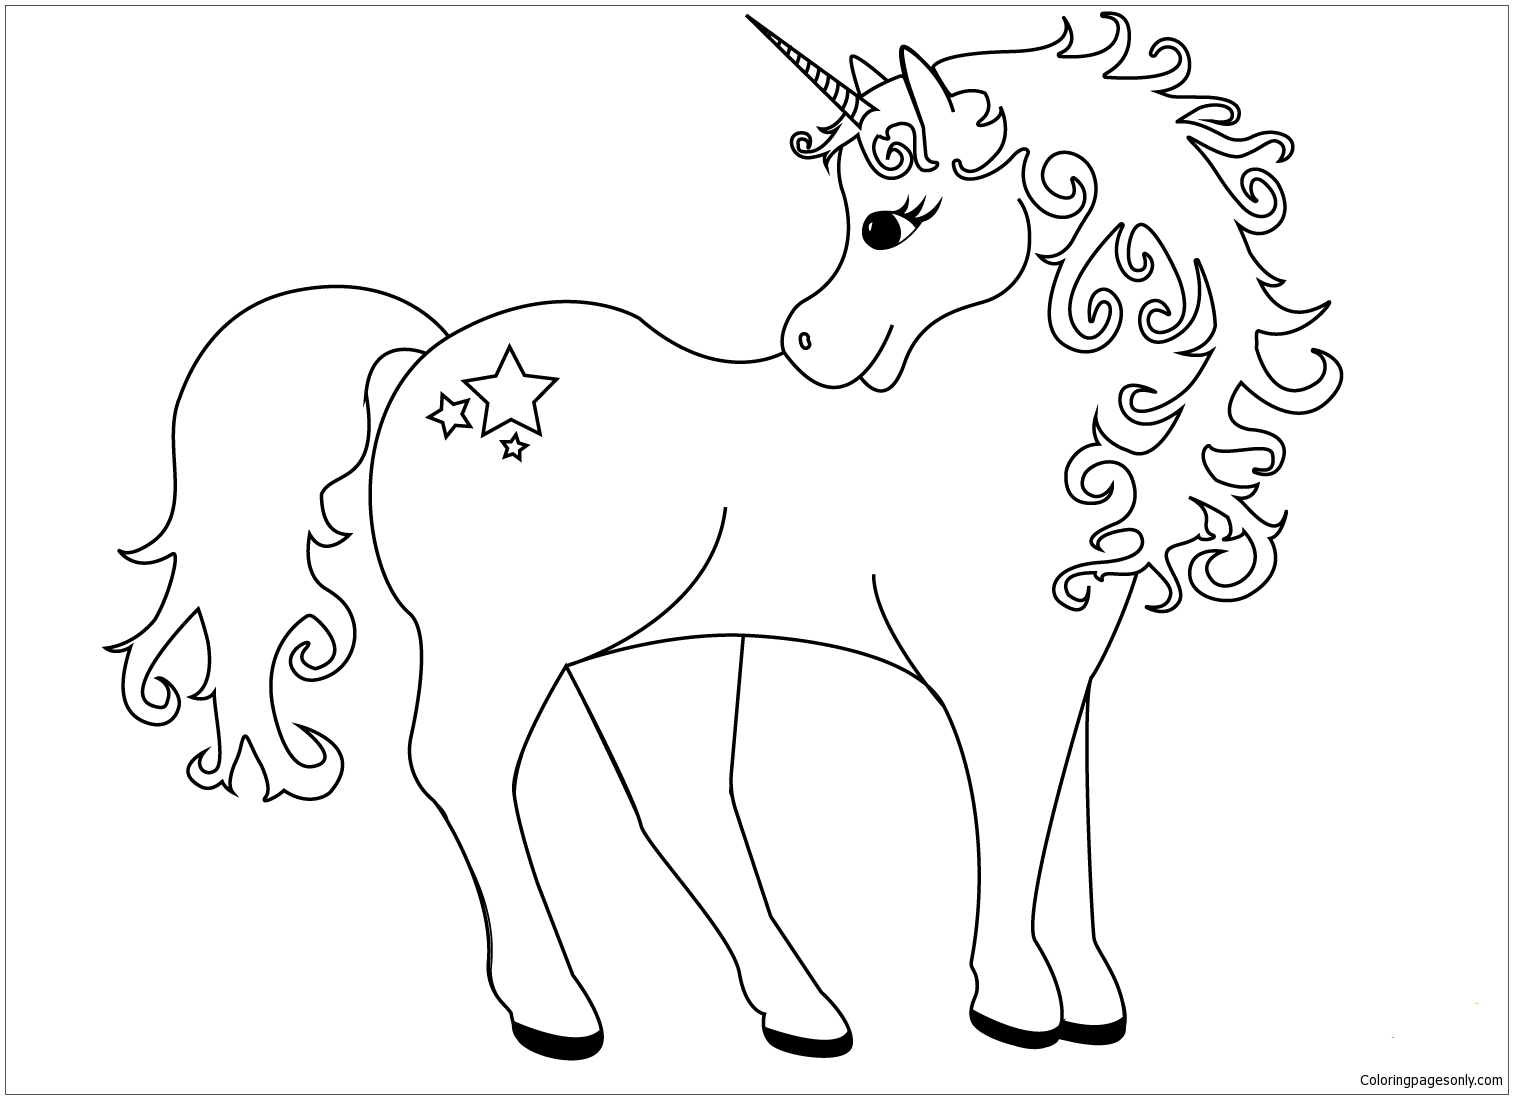 Lovely Unicorn Coloring Pages - Cartoons Coloring Pages - Coloring